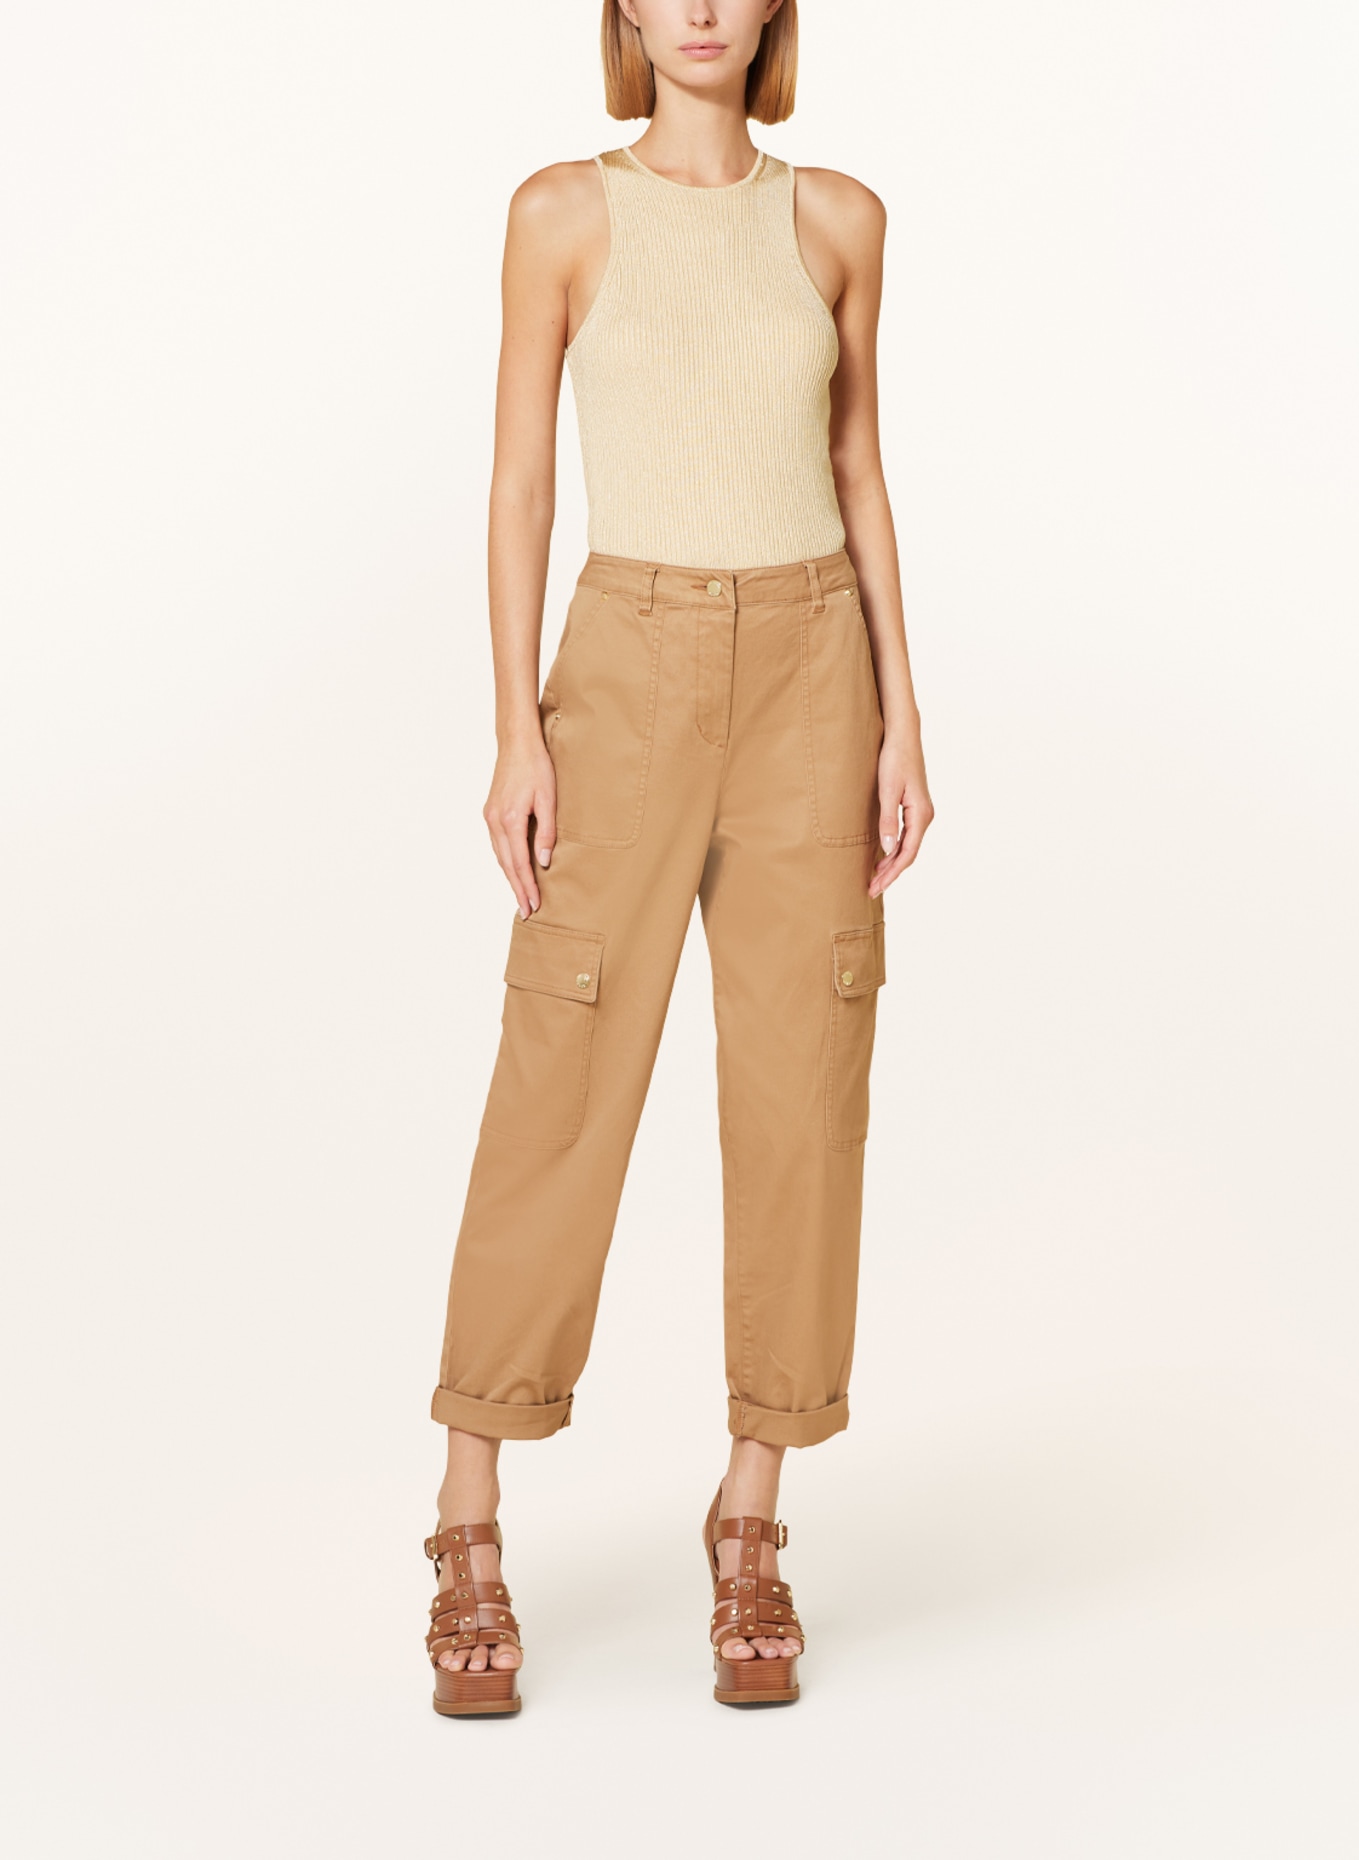 MICHAEL KORS Knit top with glitter thread, Color: GOLD (Image 2)